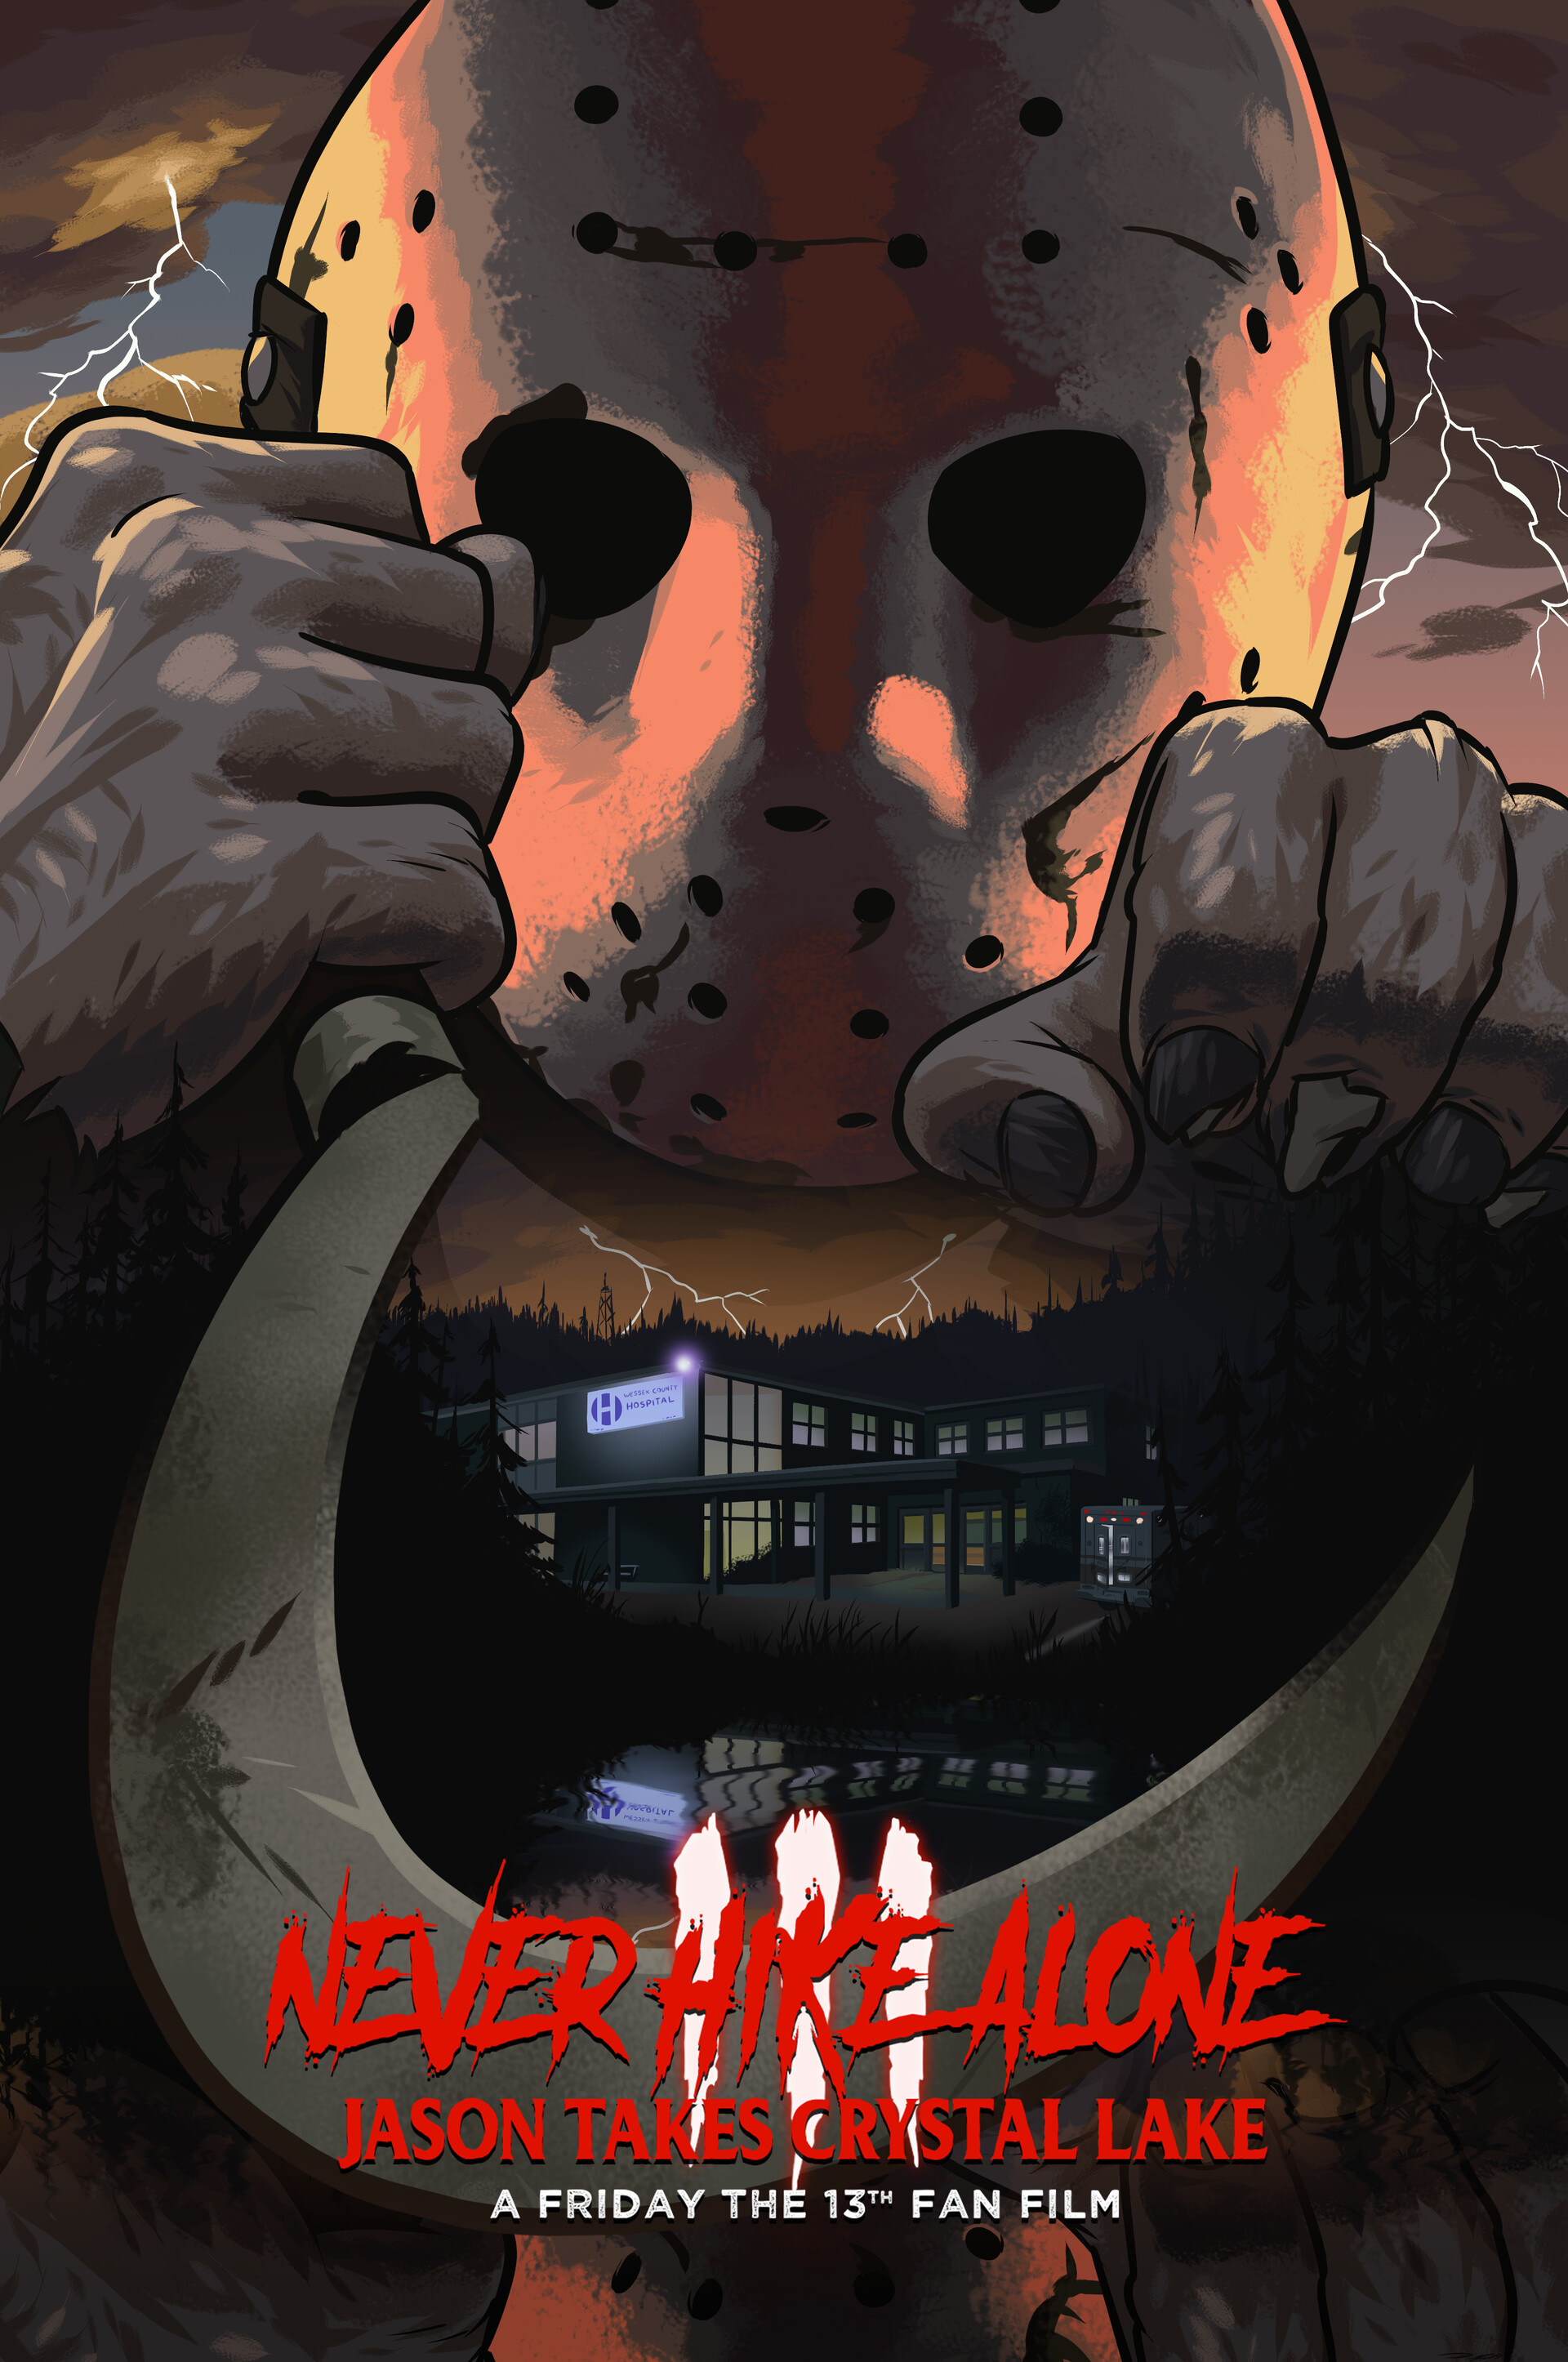 ArtStation - Friday the 13th Fan Made poster